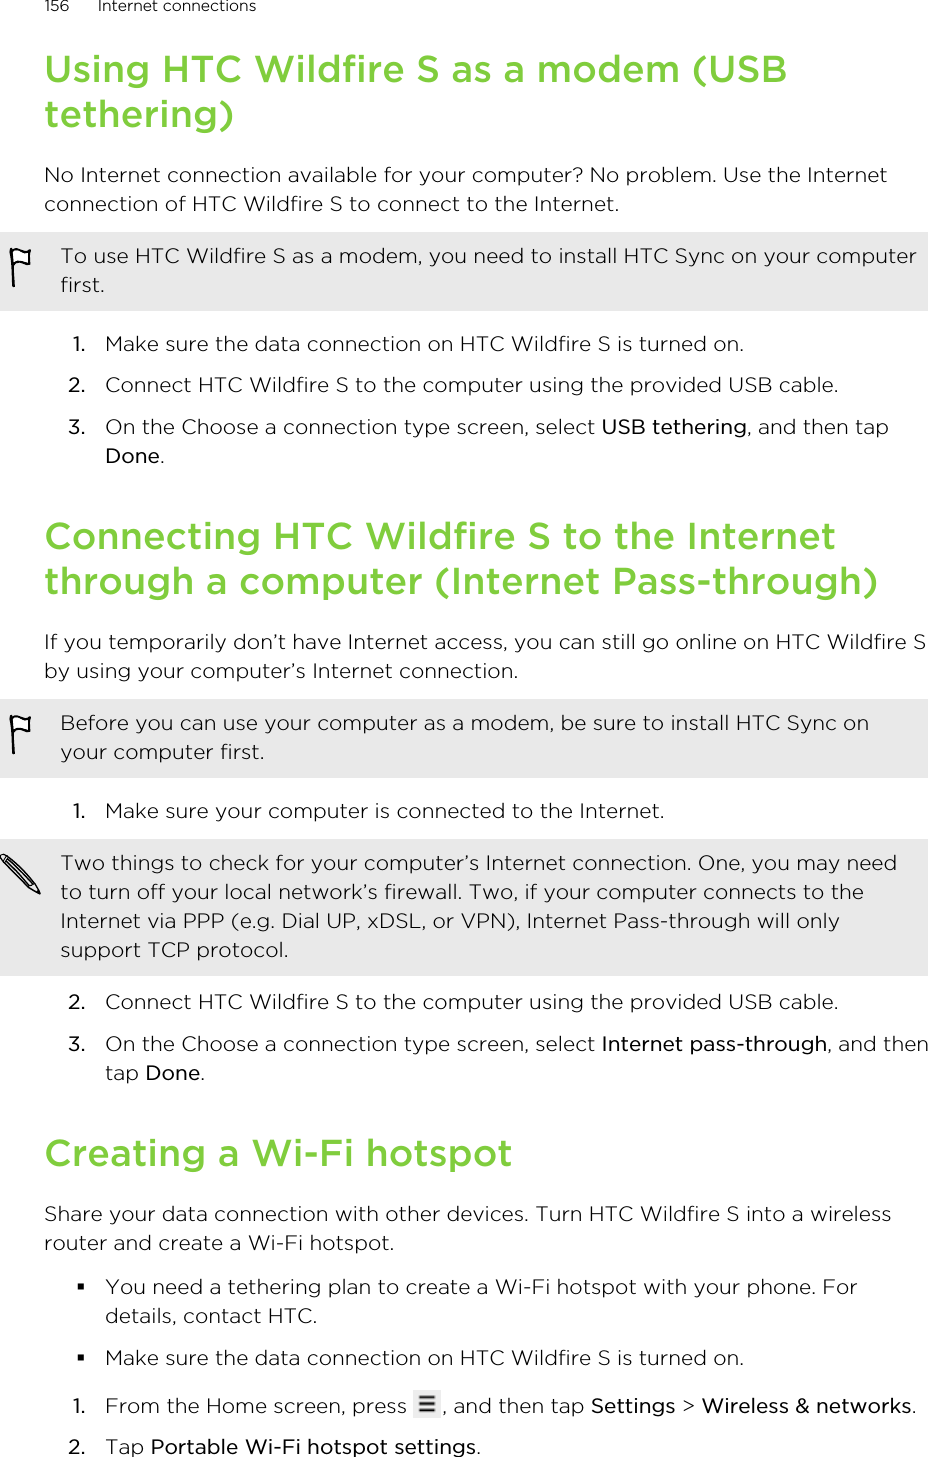 Using HTC Wildfire S as a modem (USBtethering)No Internet connection available for your computer? No problem. Use the Internetconnection of HTC Wildfire S to connect to the Internet.To use HTC Wildfire S as a modem, you need to install HTC Sync on your computerfirst.1. Make sure the data connection on HTC Wildfire S is turned on.2. Connect HTC Wildfire S to the computer using the provided USB cable.3. On the Choose a connection type screen, select USB tethering, and then tapDone.Connecting HTC Wildfire S to the Internetthrough a computer (Internet Pass-through)If you temporarily don’t have Internet access, you can still go online on HTC Wildfire Sby using your computer’s Internet connection.Before you can use your computer as a modem, be sure to install HTC Sync onyour computer first.1. Make sure your computer is connected to the Internet. Two things to check for your computer’s Internet connection. One, you may needto turn off your local network’s firewall. Two, if your computer connects to theInternet via PPP (e.g. Dial UP, xDSL, or VPN), Internet Pass-through will onlysupport TCP protocol.2. Connect HTC Wildfire S to the computer using the provided USB cable.3. On the Choose a connection type screen, select Internet pass-through, and thentap Done.Creating a Wi-Fi hotspotShare your data connection with other devices. Turn HTC Wildfire S into a wirelessrouter and create a Wi-Fi hotspot.§You need a tethering plan to create a Wi-Fi hotspot with your phone. Fordetails, contact HTC.§Make sure the data connection on HTC Wildfire S is turned on.1. From the Home screen, press  , and then tap Settings &gt; Wireless &amp; networks.2. Tap Portable Wi-Fi hotspot settings.156 Internet connections